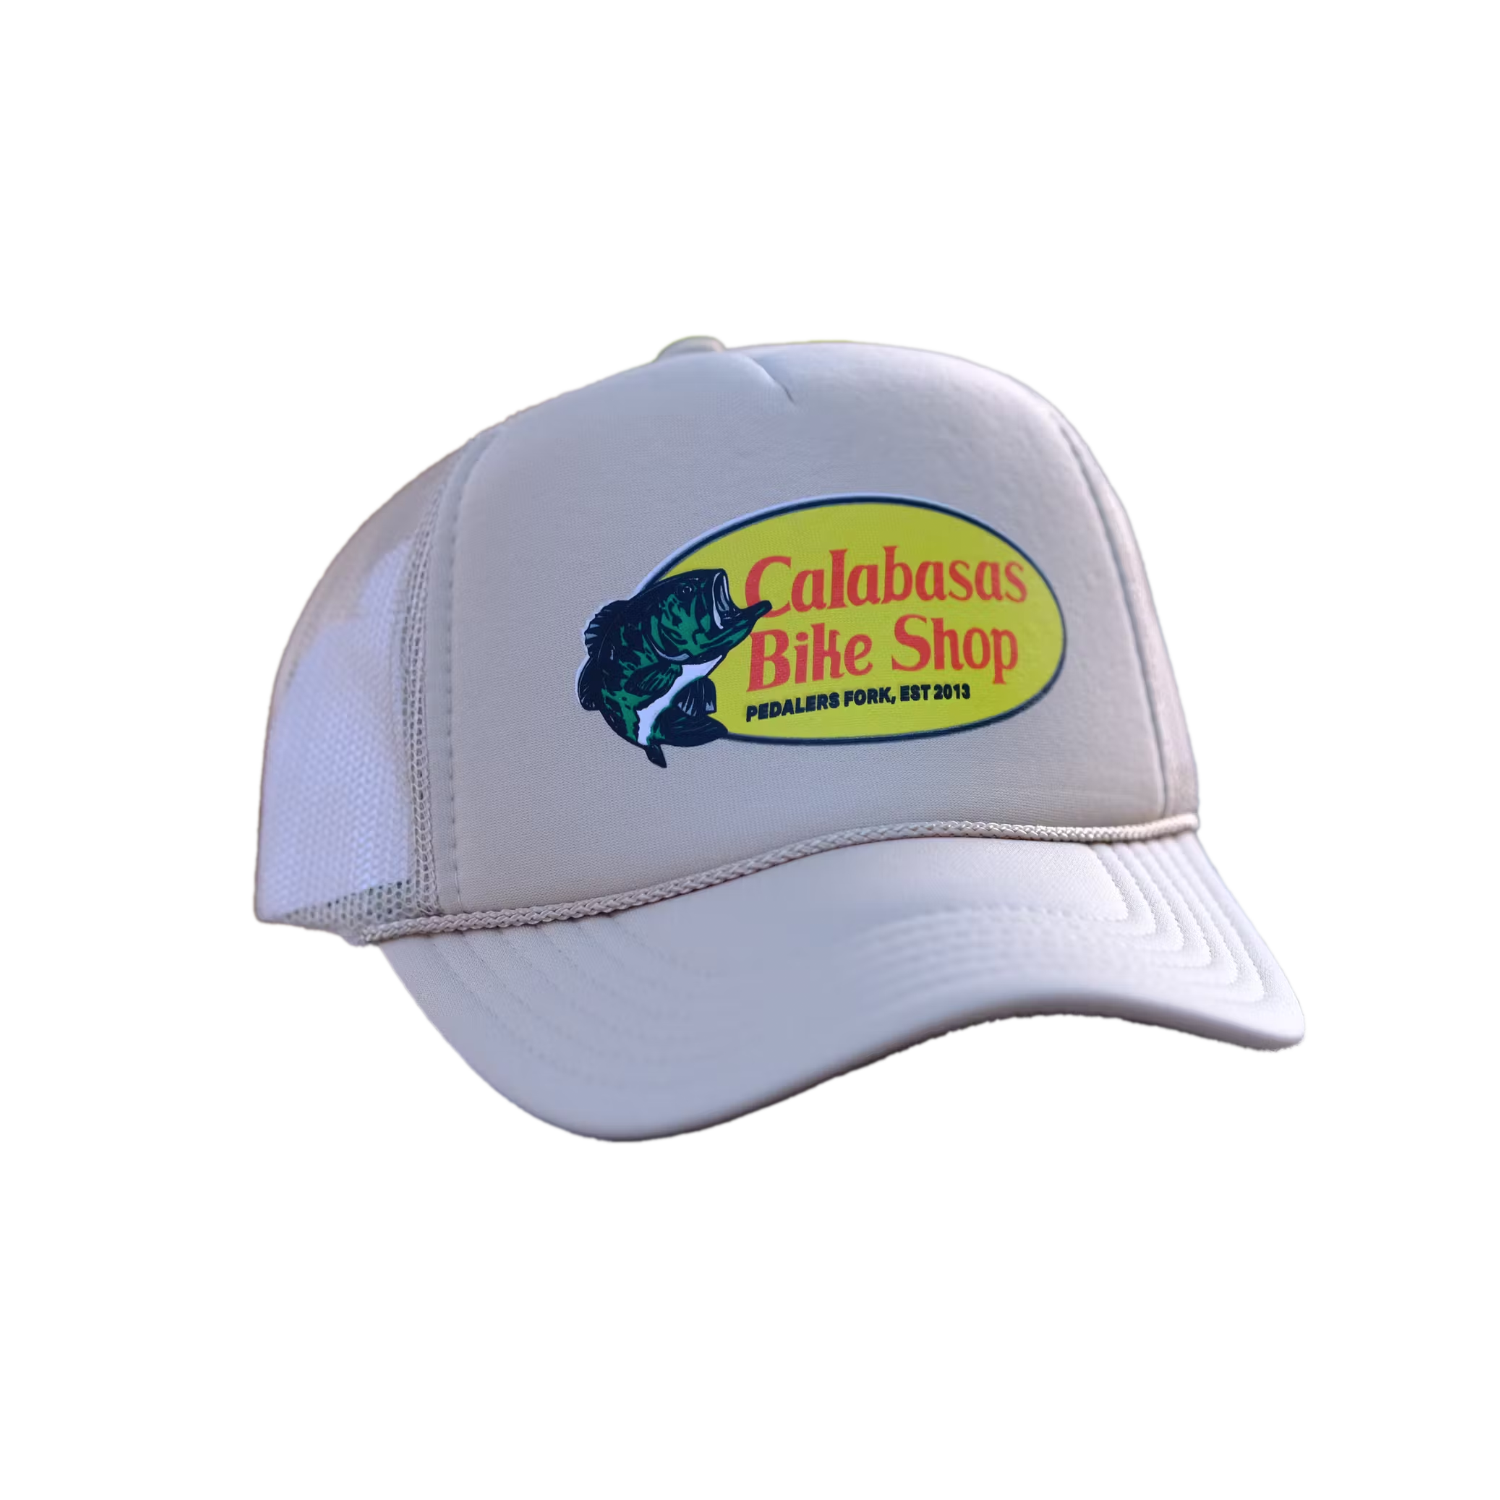 Trucker hat with Calabasas Bike Shop logo and graphic of fish